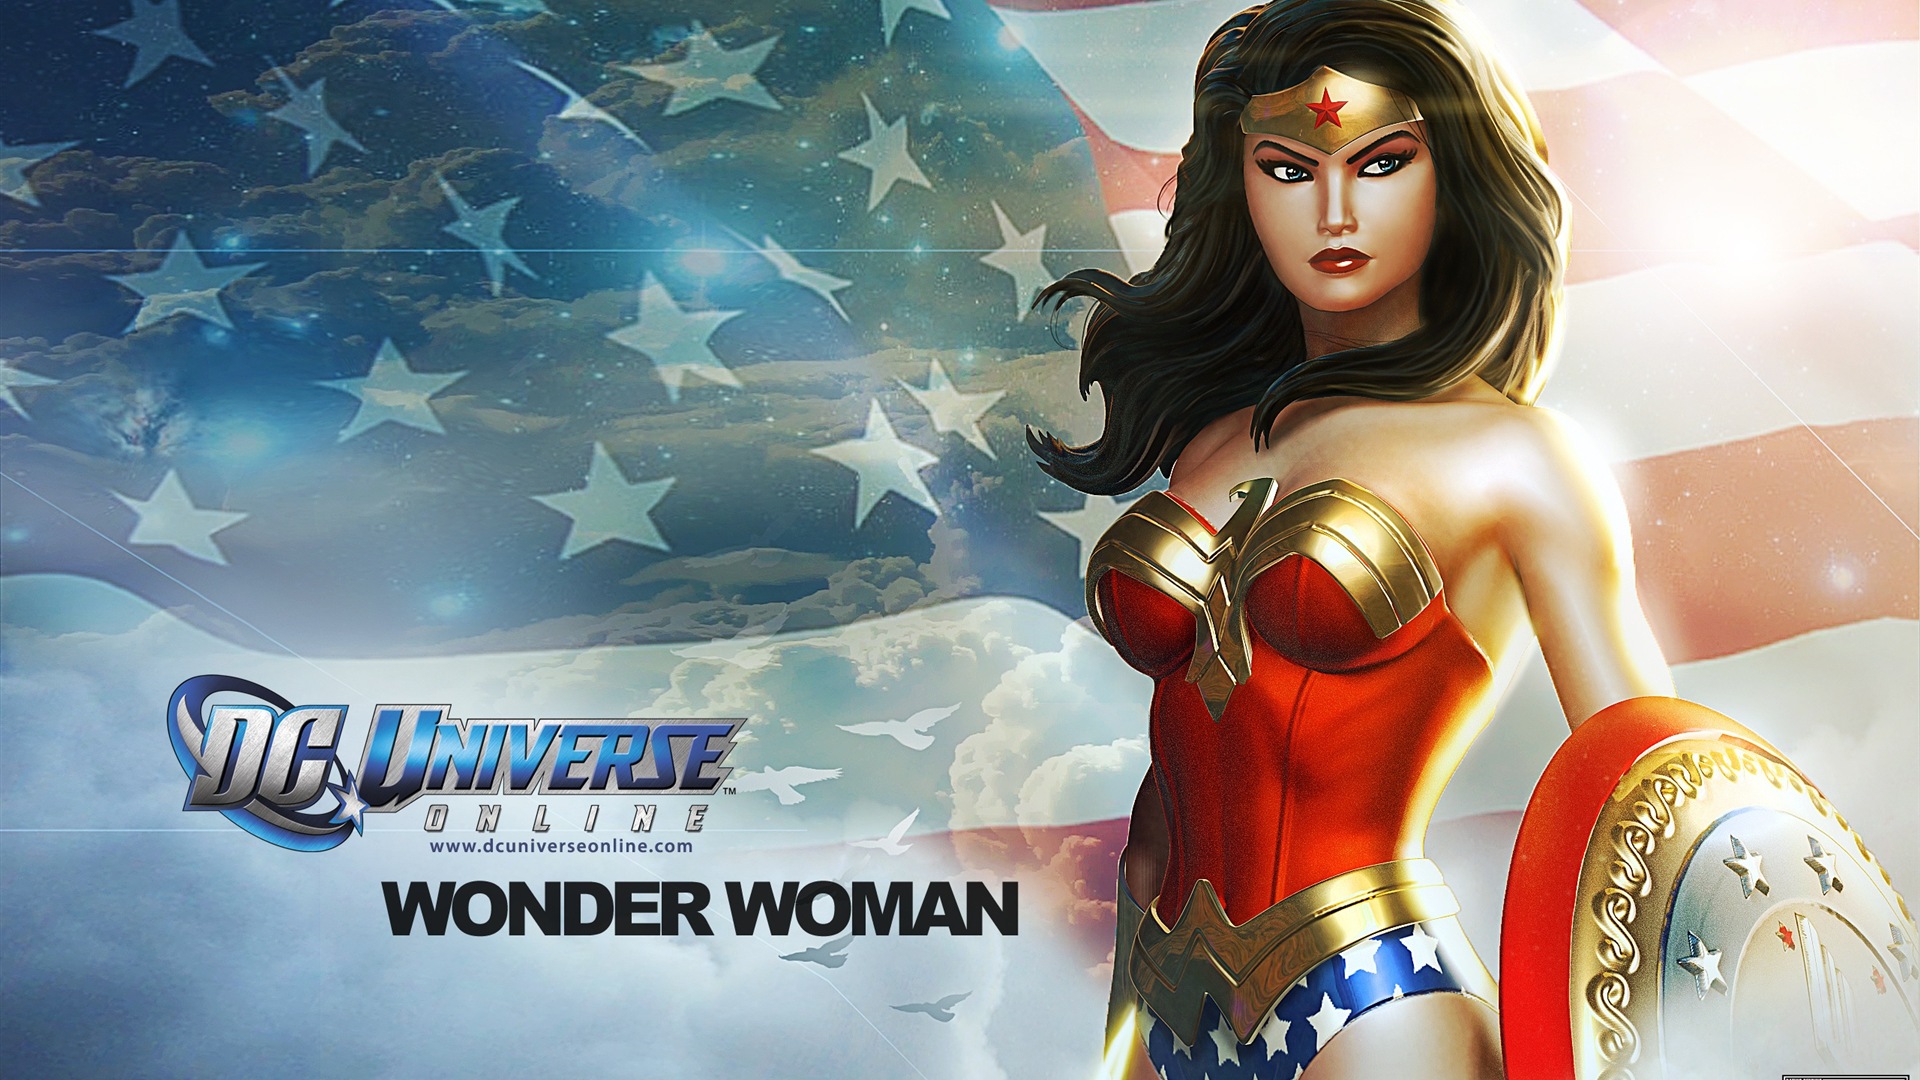 DC Universe Online HD game wallpapers #23 - 1920x1080